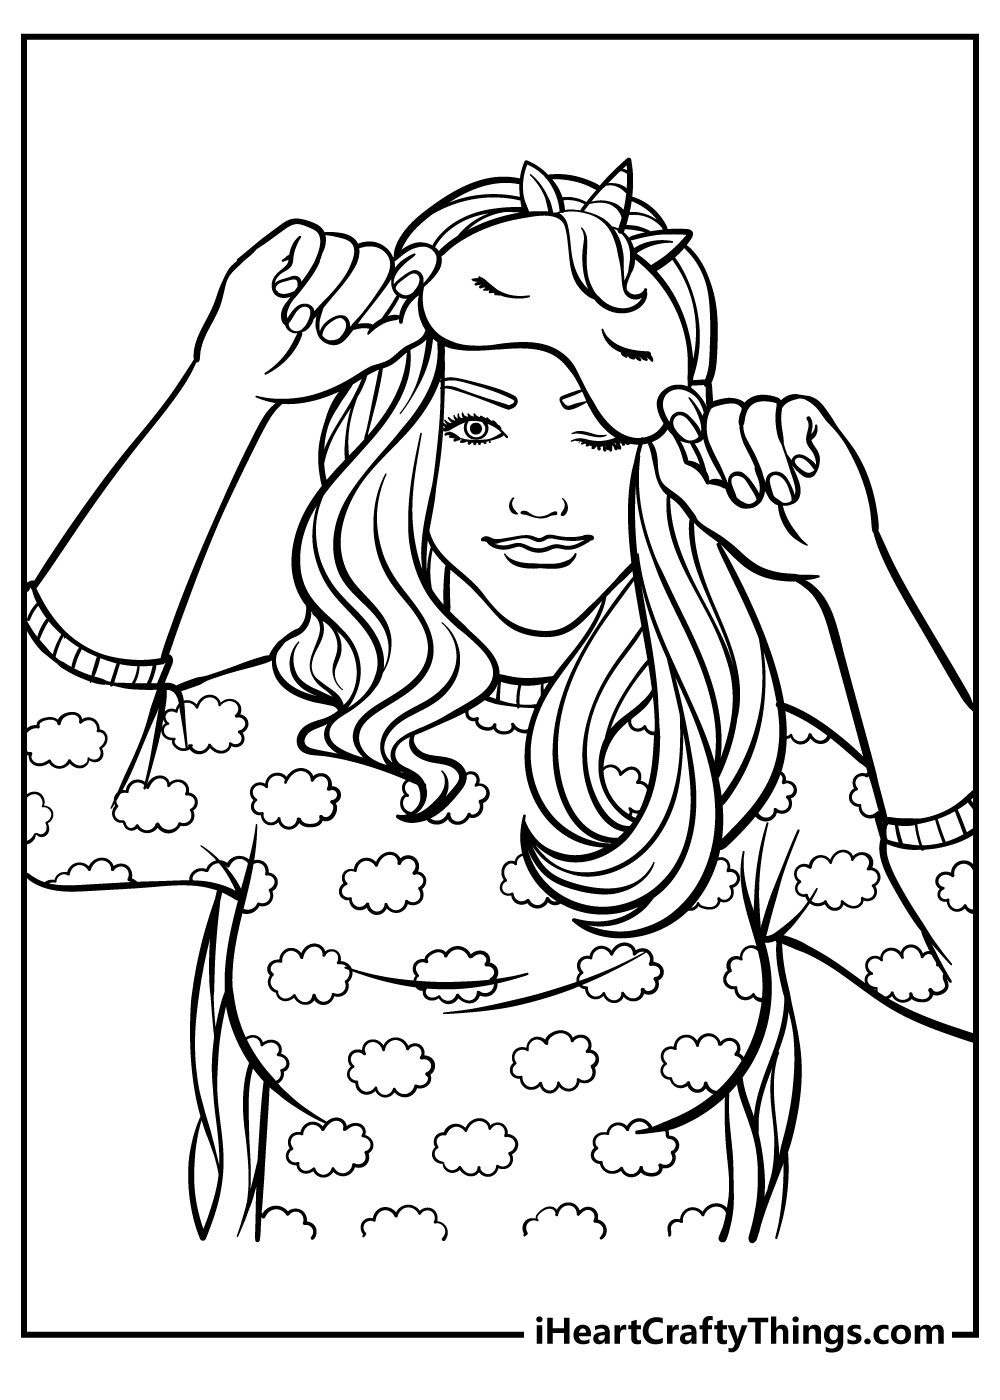 Coloring Pages For Teens free download